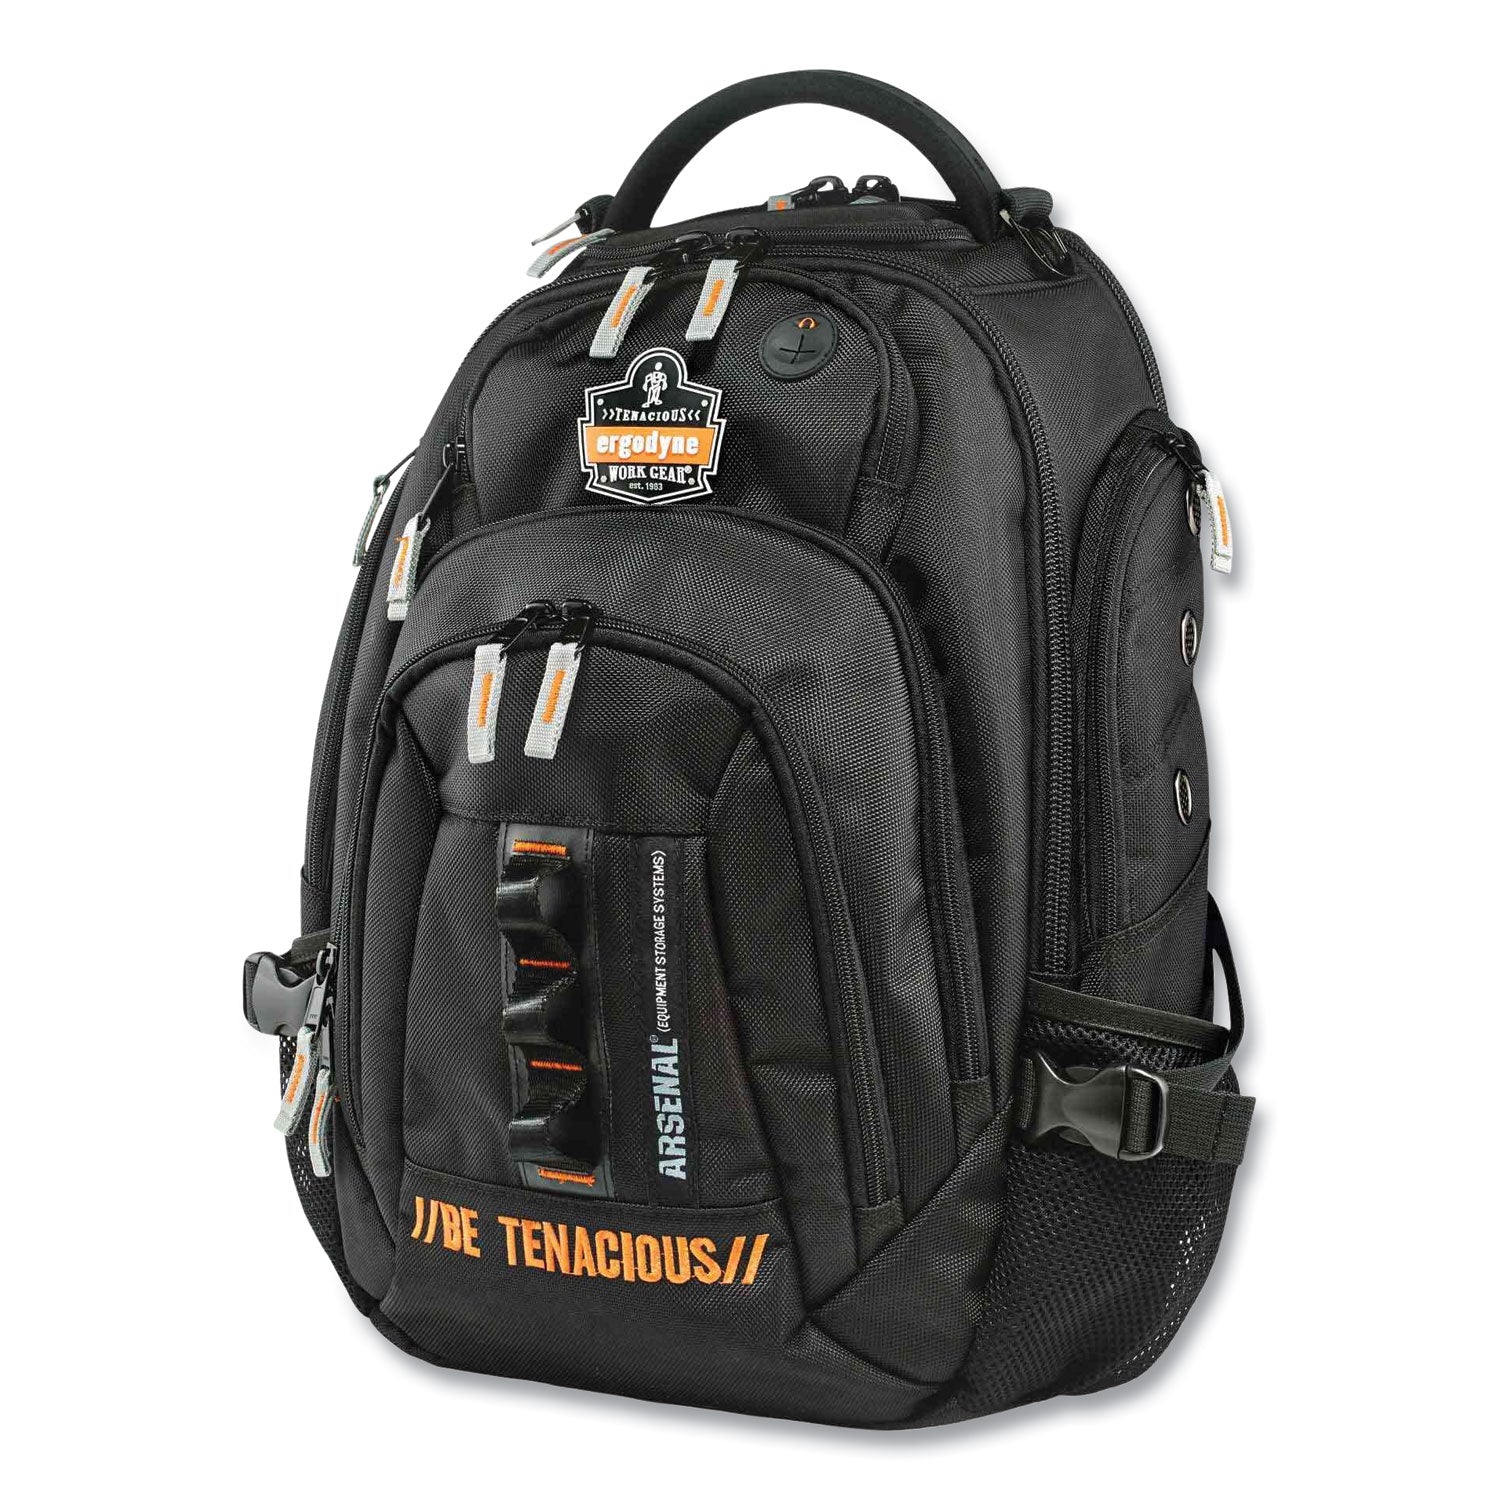 arsenal-5144-mobile-office-backpack-8-x-14-x-28-black-ships-in-1-3-business-days_ego13044 - 1